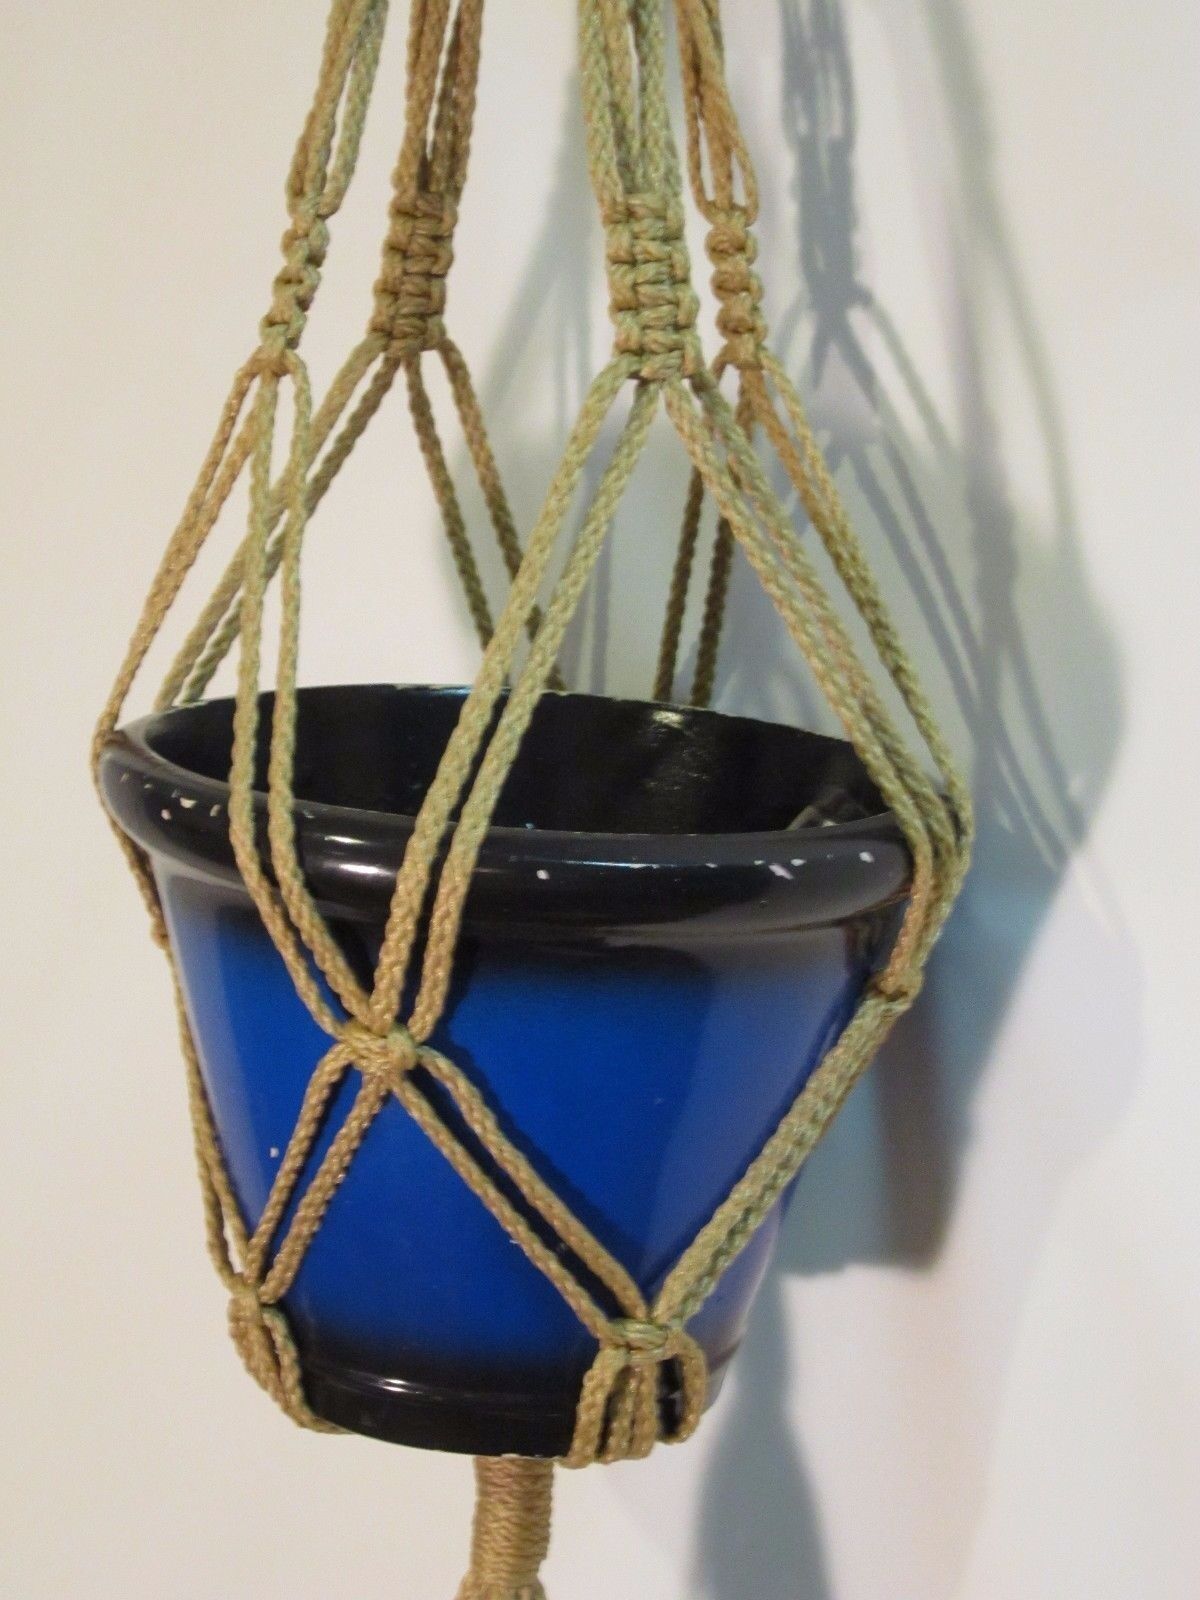 MACRAME PLANT HANGER 24 in Vintage with BEADS Black Cord - CHOOSE CORD COLOR